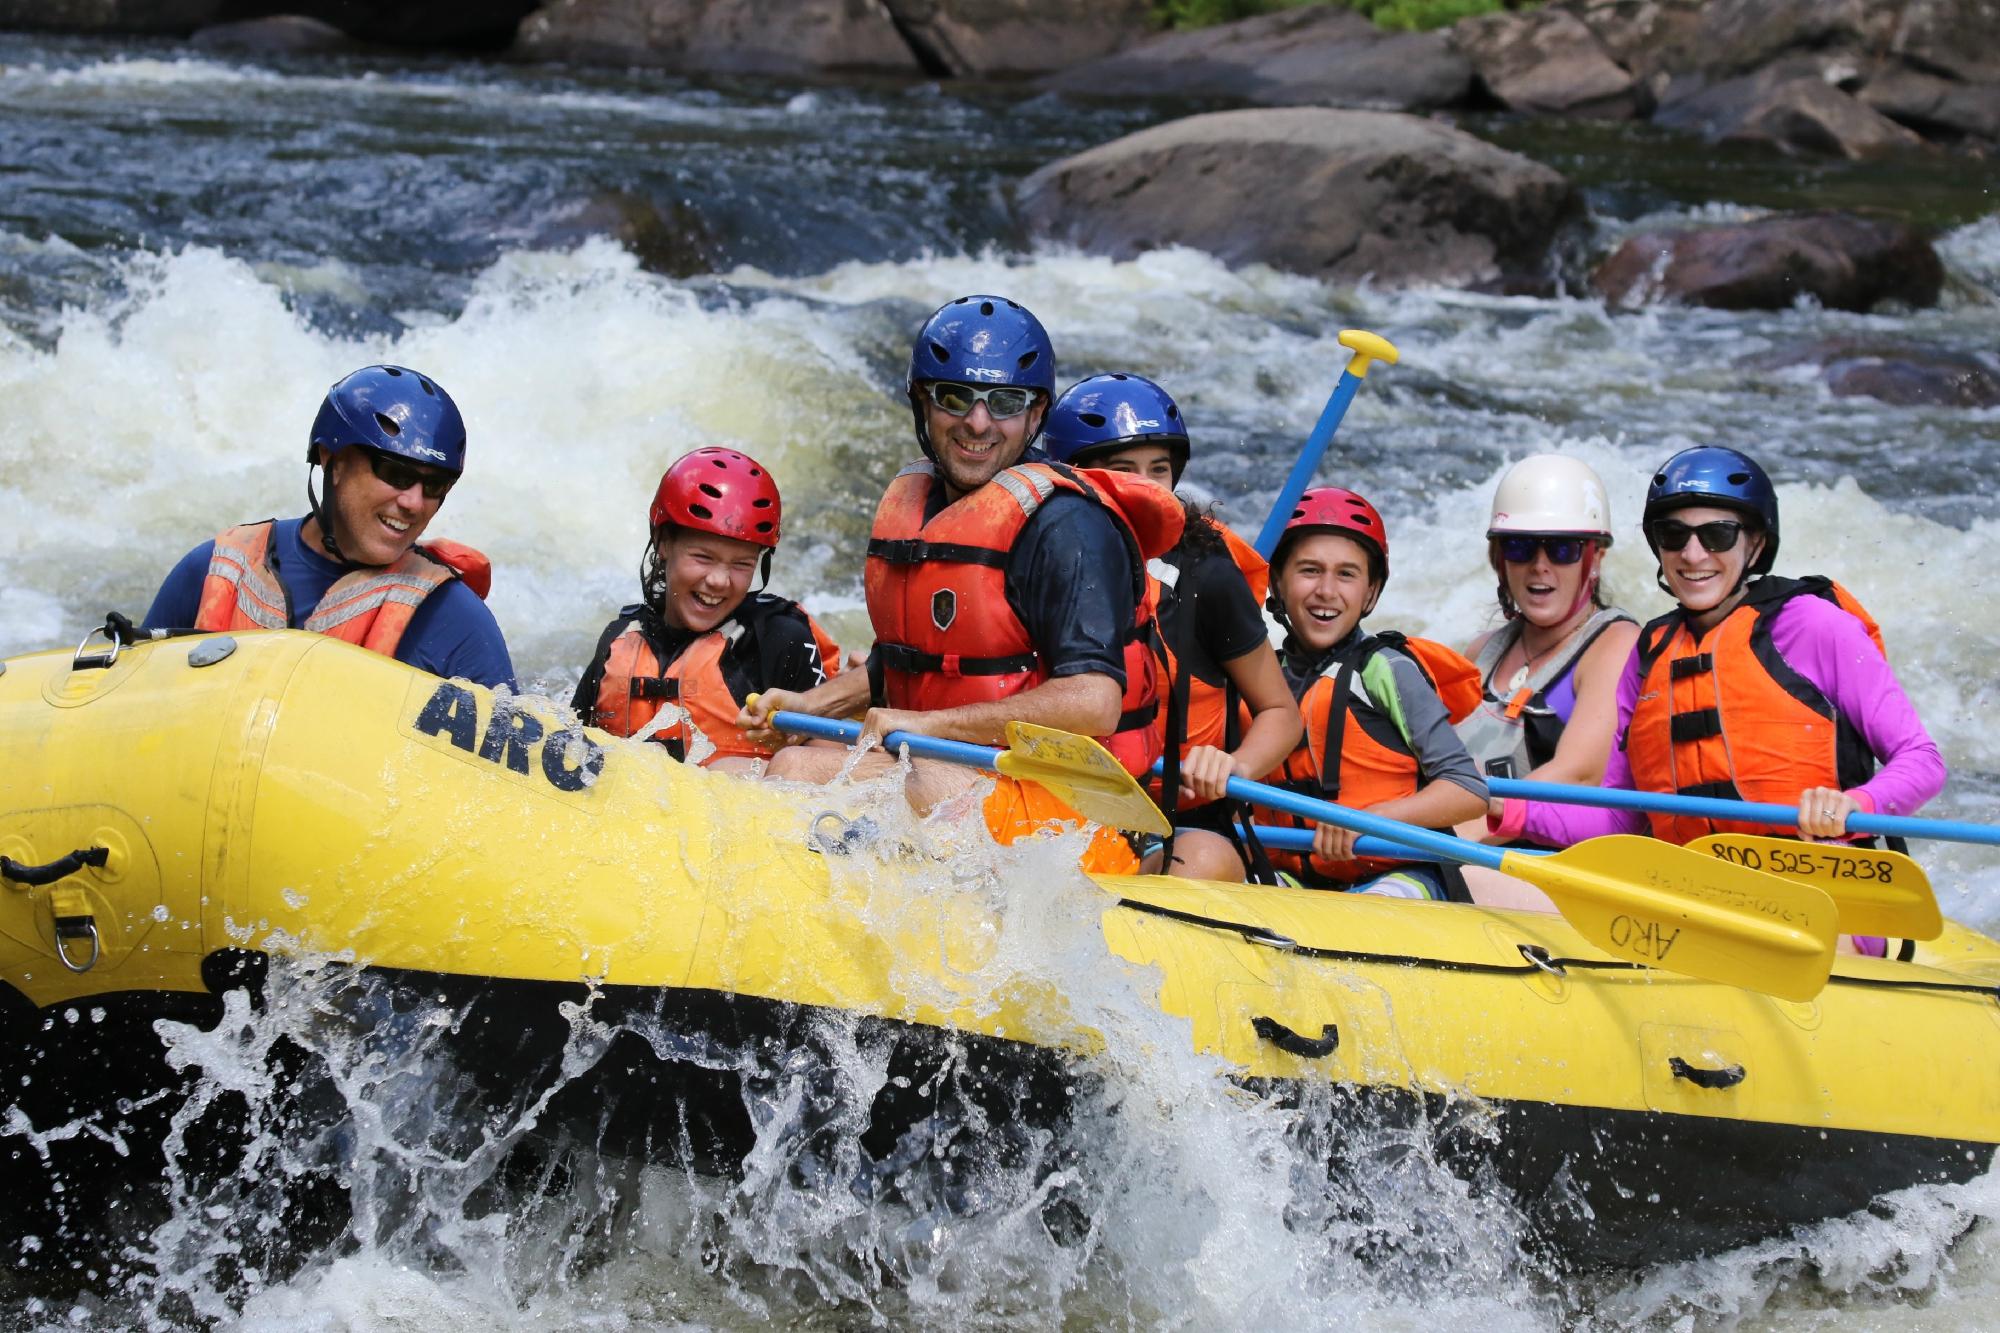 Black River Rafting - Watertown, NY| Adirondack River Outfitters